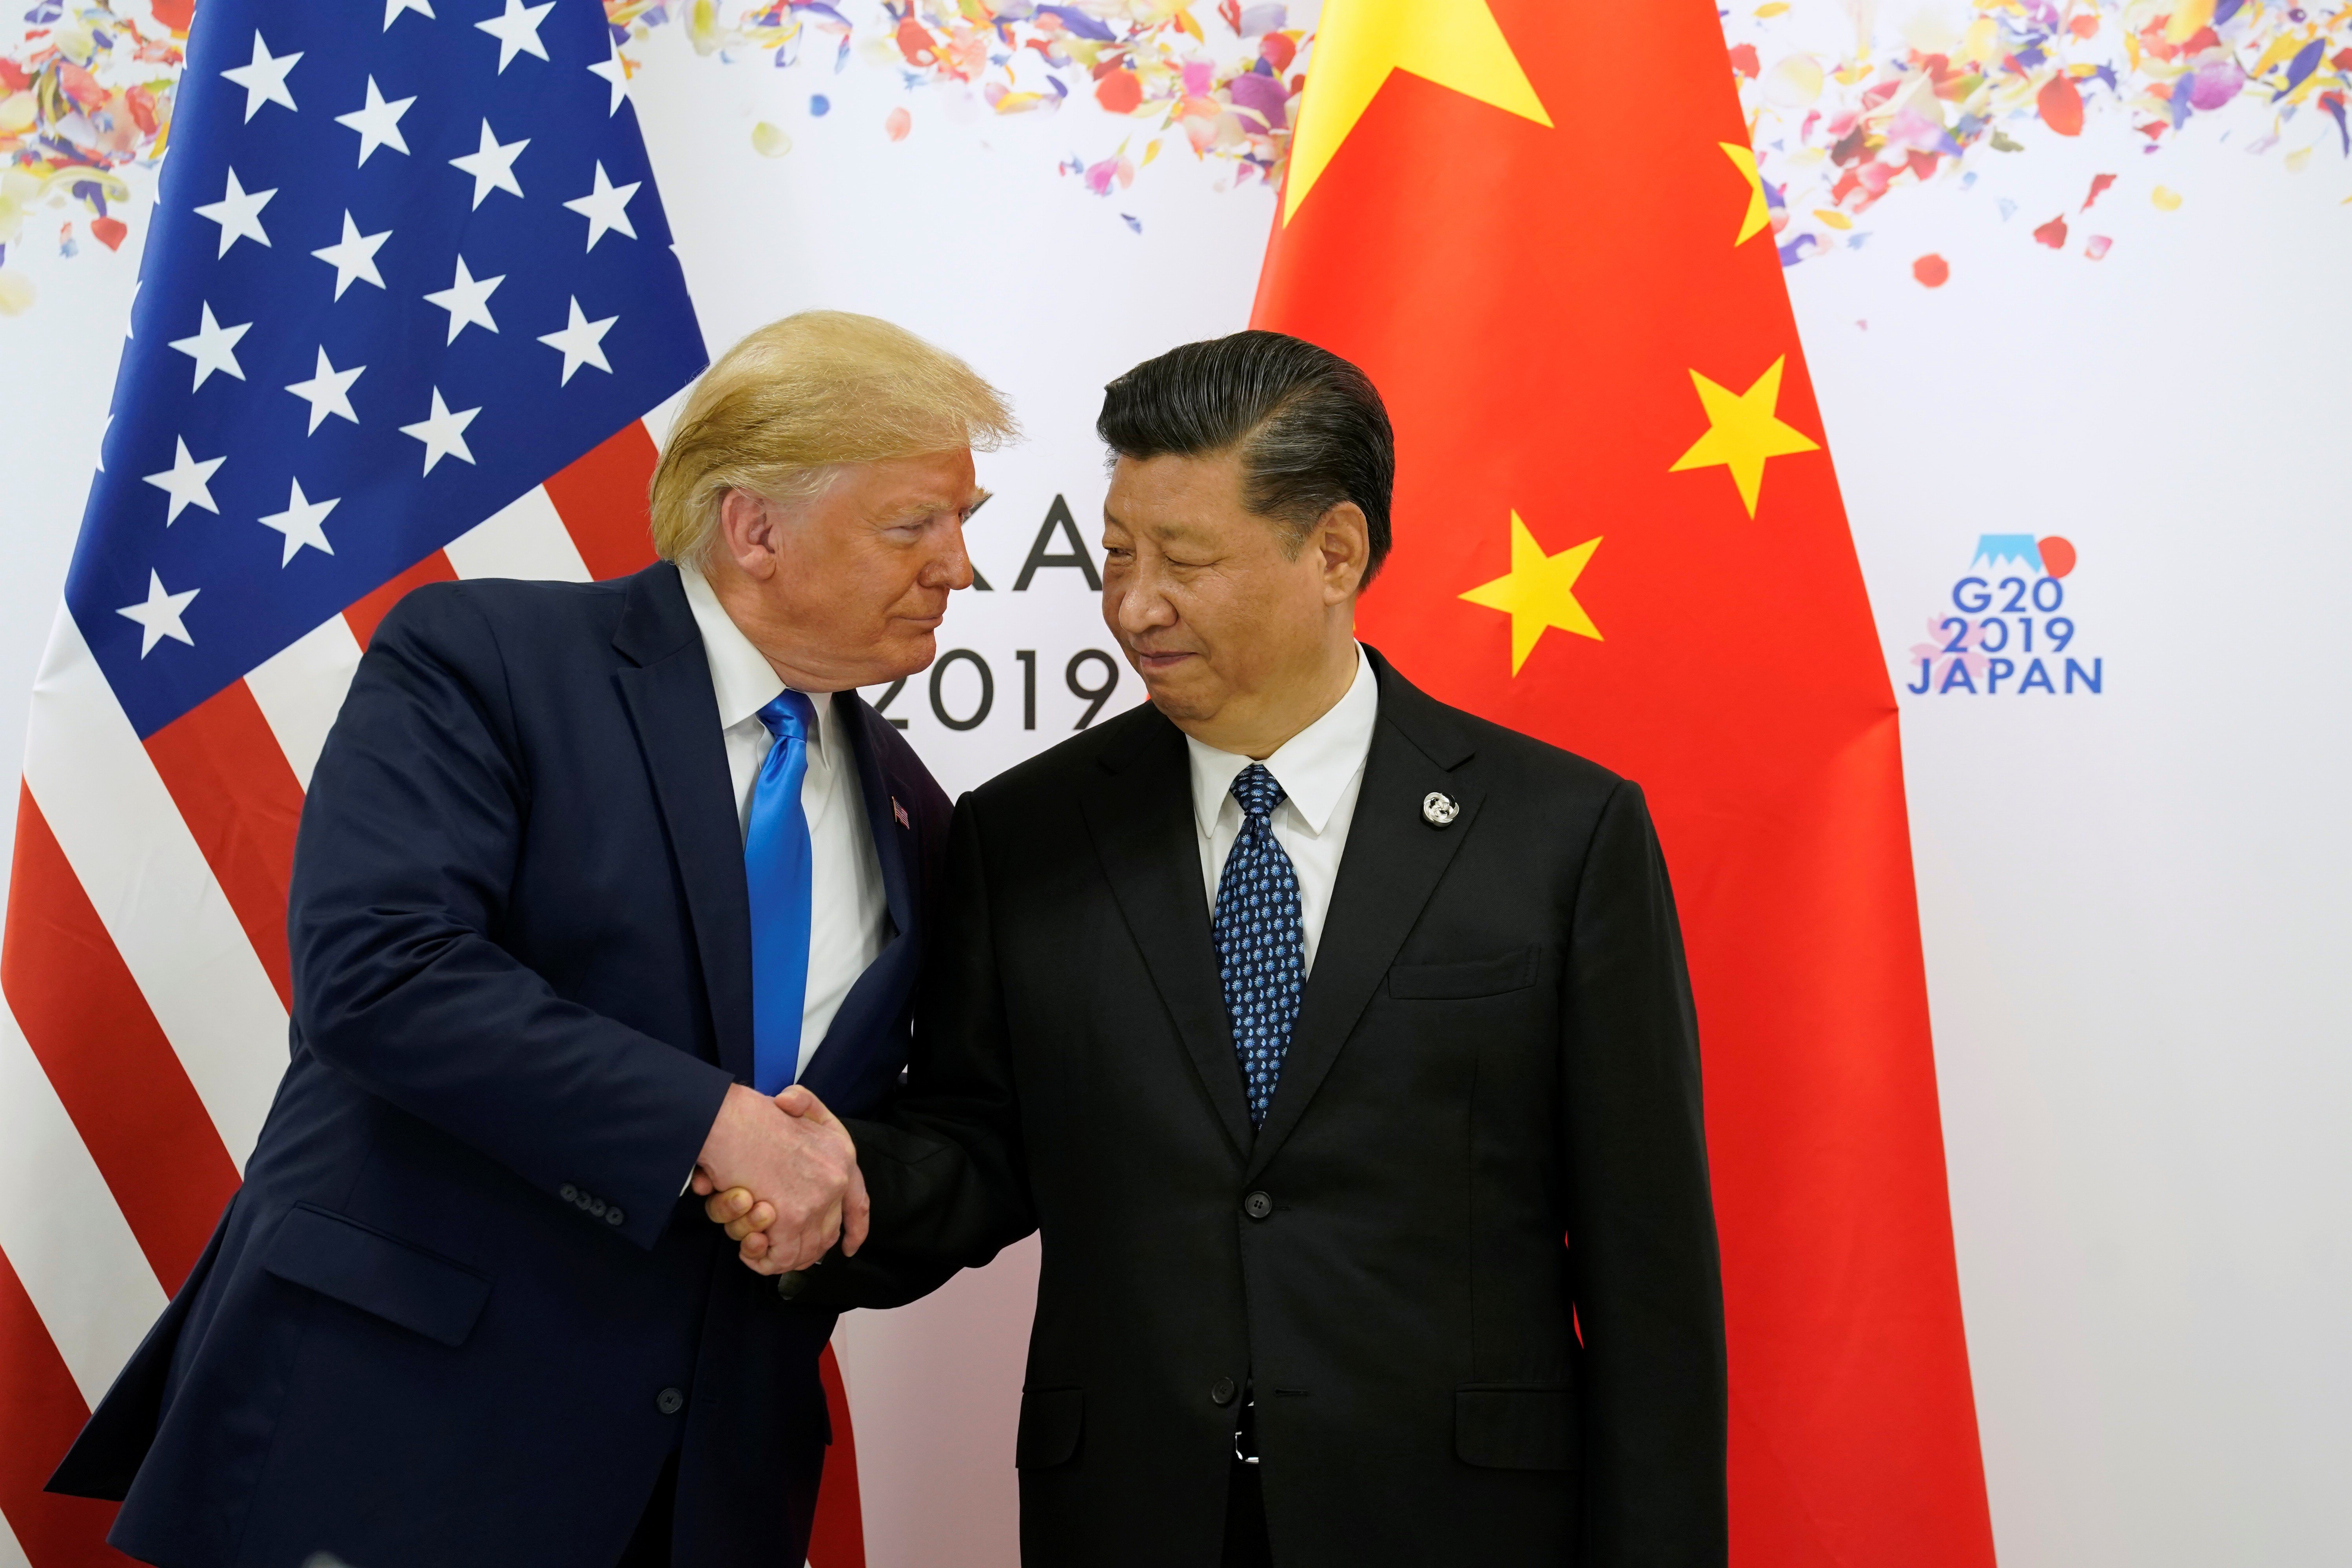 US President Donald Trump and Chinese President Xi Jinping before bilateral talks during the G20 leaders summit in Osaka, Japan in June. Photo: Reuters